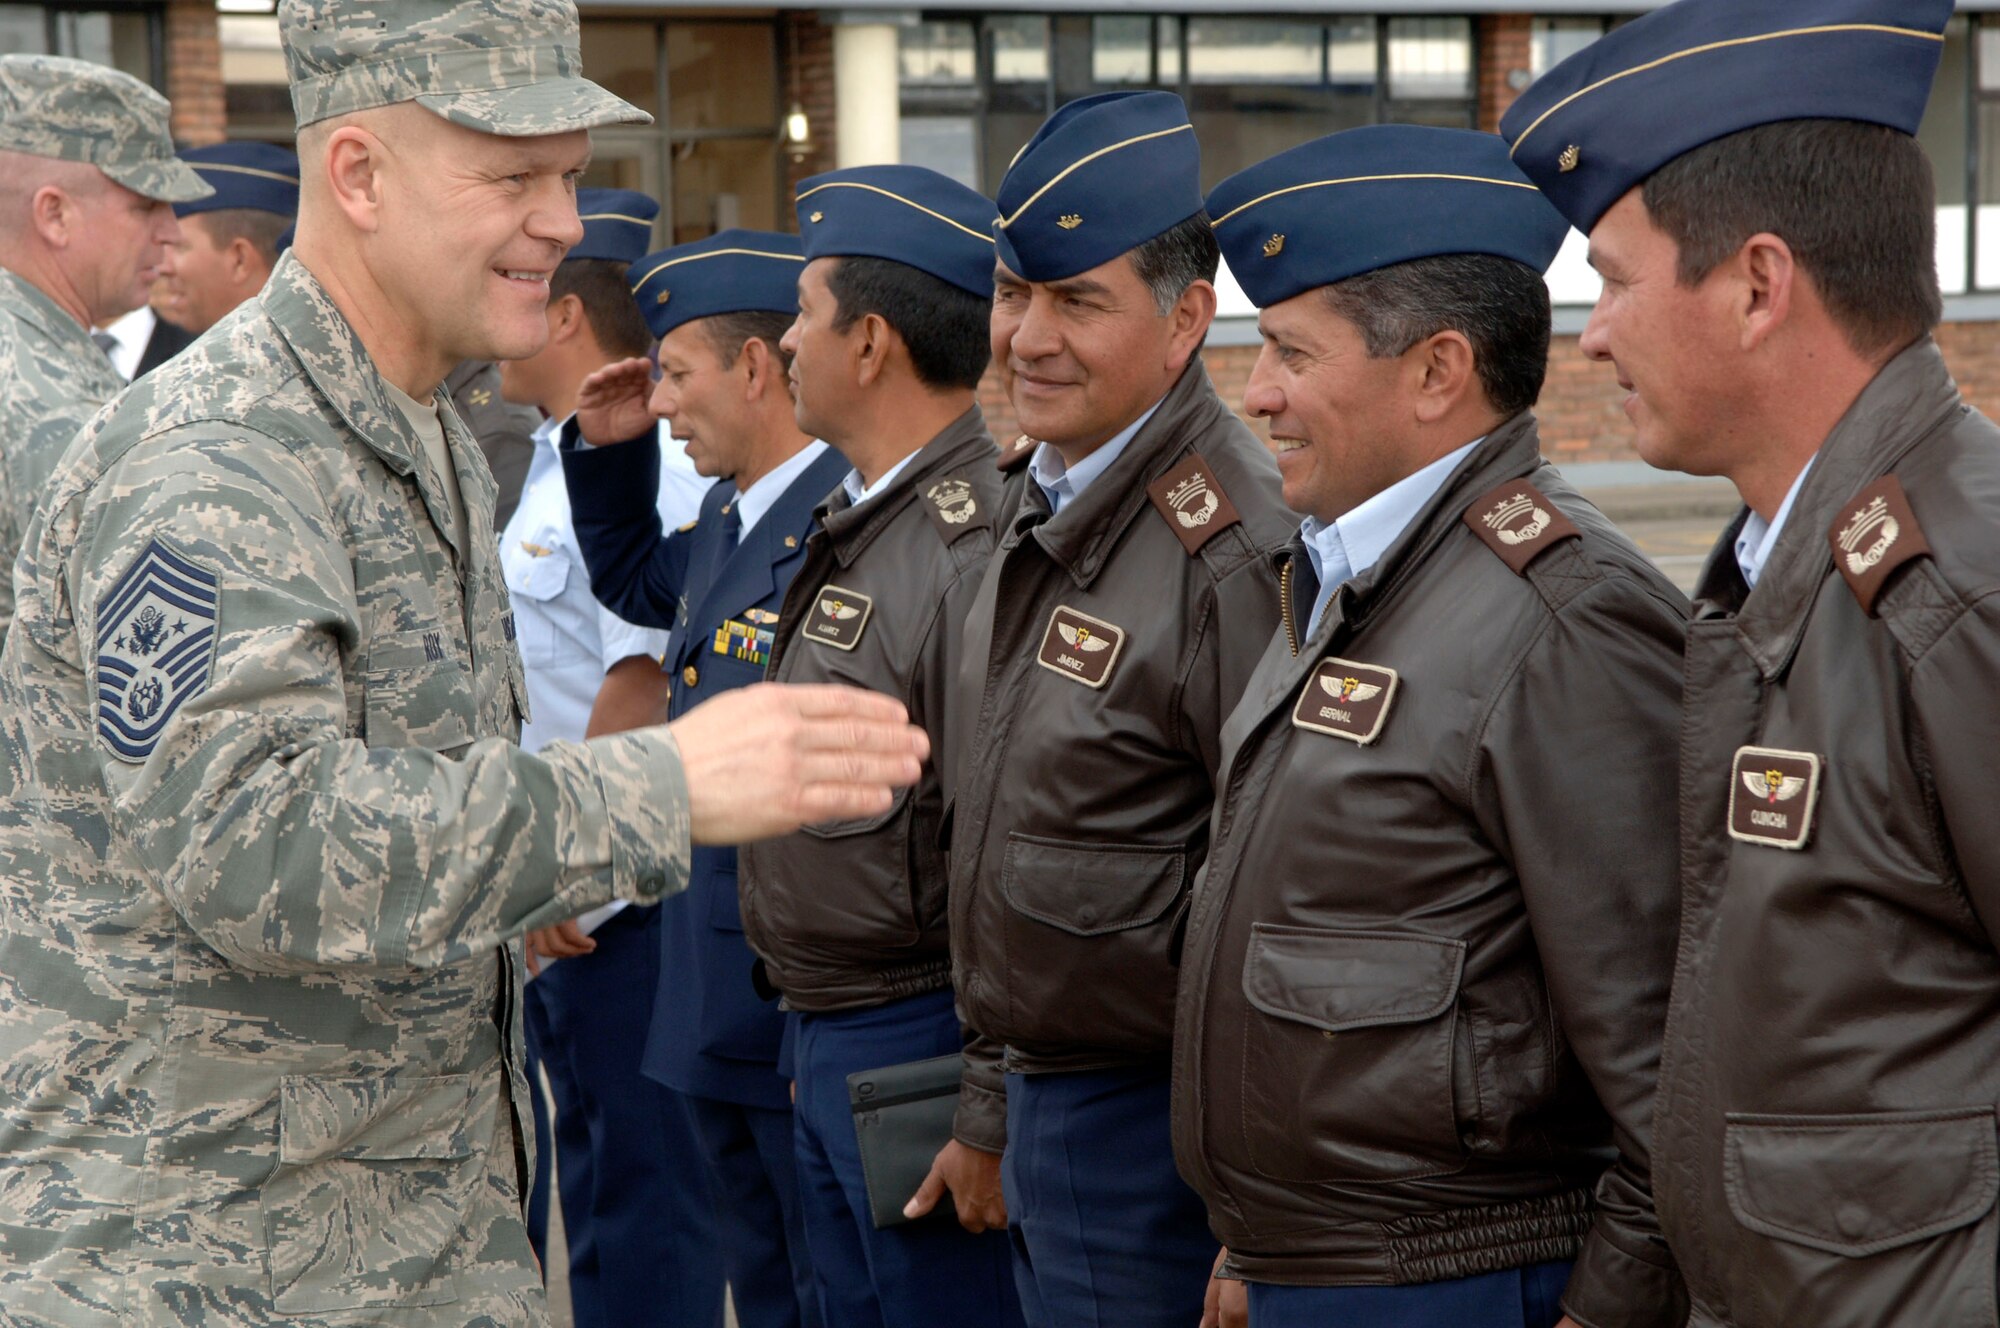 BOGOTA, Colombia -- Chief Master Sgt. of the Air Force James Roy greets Colombian Air Force staff at the Escuela de Suboficiales Feb. 1. The Escuela de Suboficiales is a three-year NCO academy which grants undergraduate degrees in military specialties to more than 100 students a year. Chief Roy's visit focused on strengthening relationships between U.S. and Columbian Airmen. (U.S. Air Force photo/Tech. Sgt. Eric Petosky)